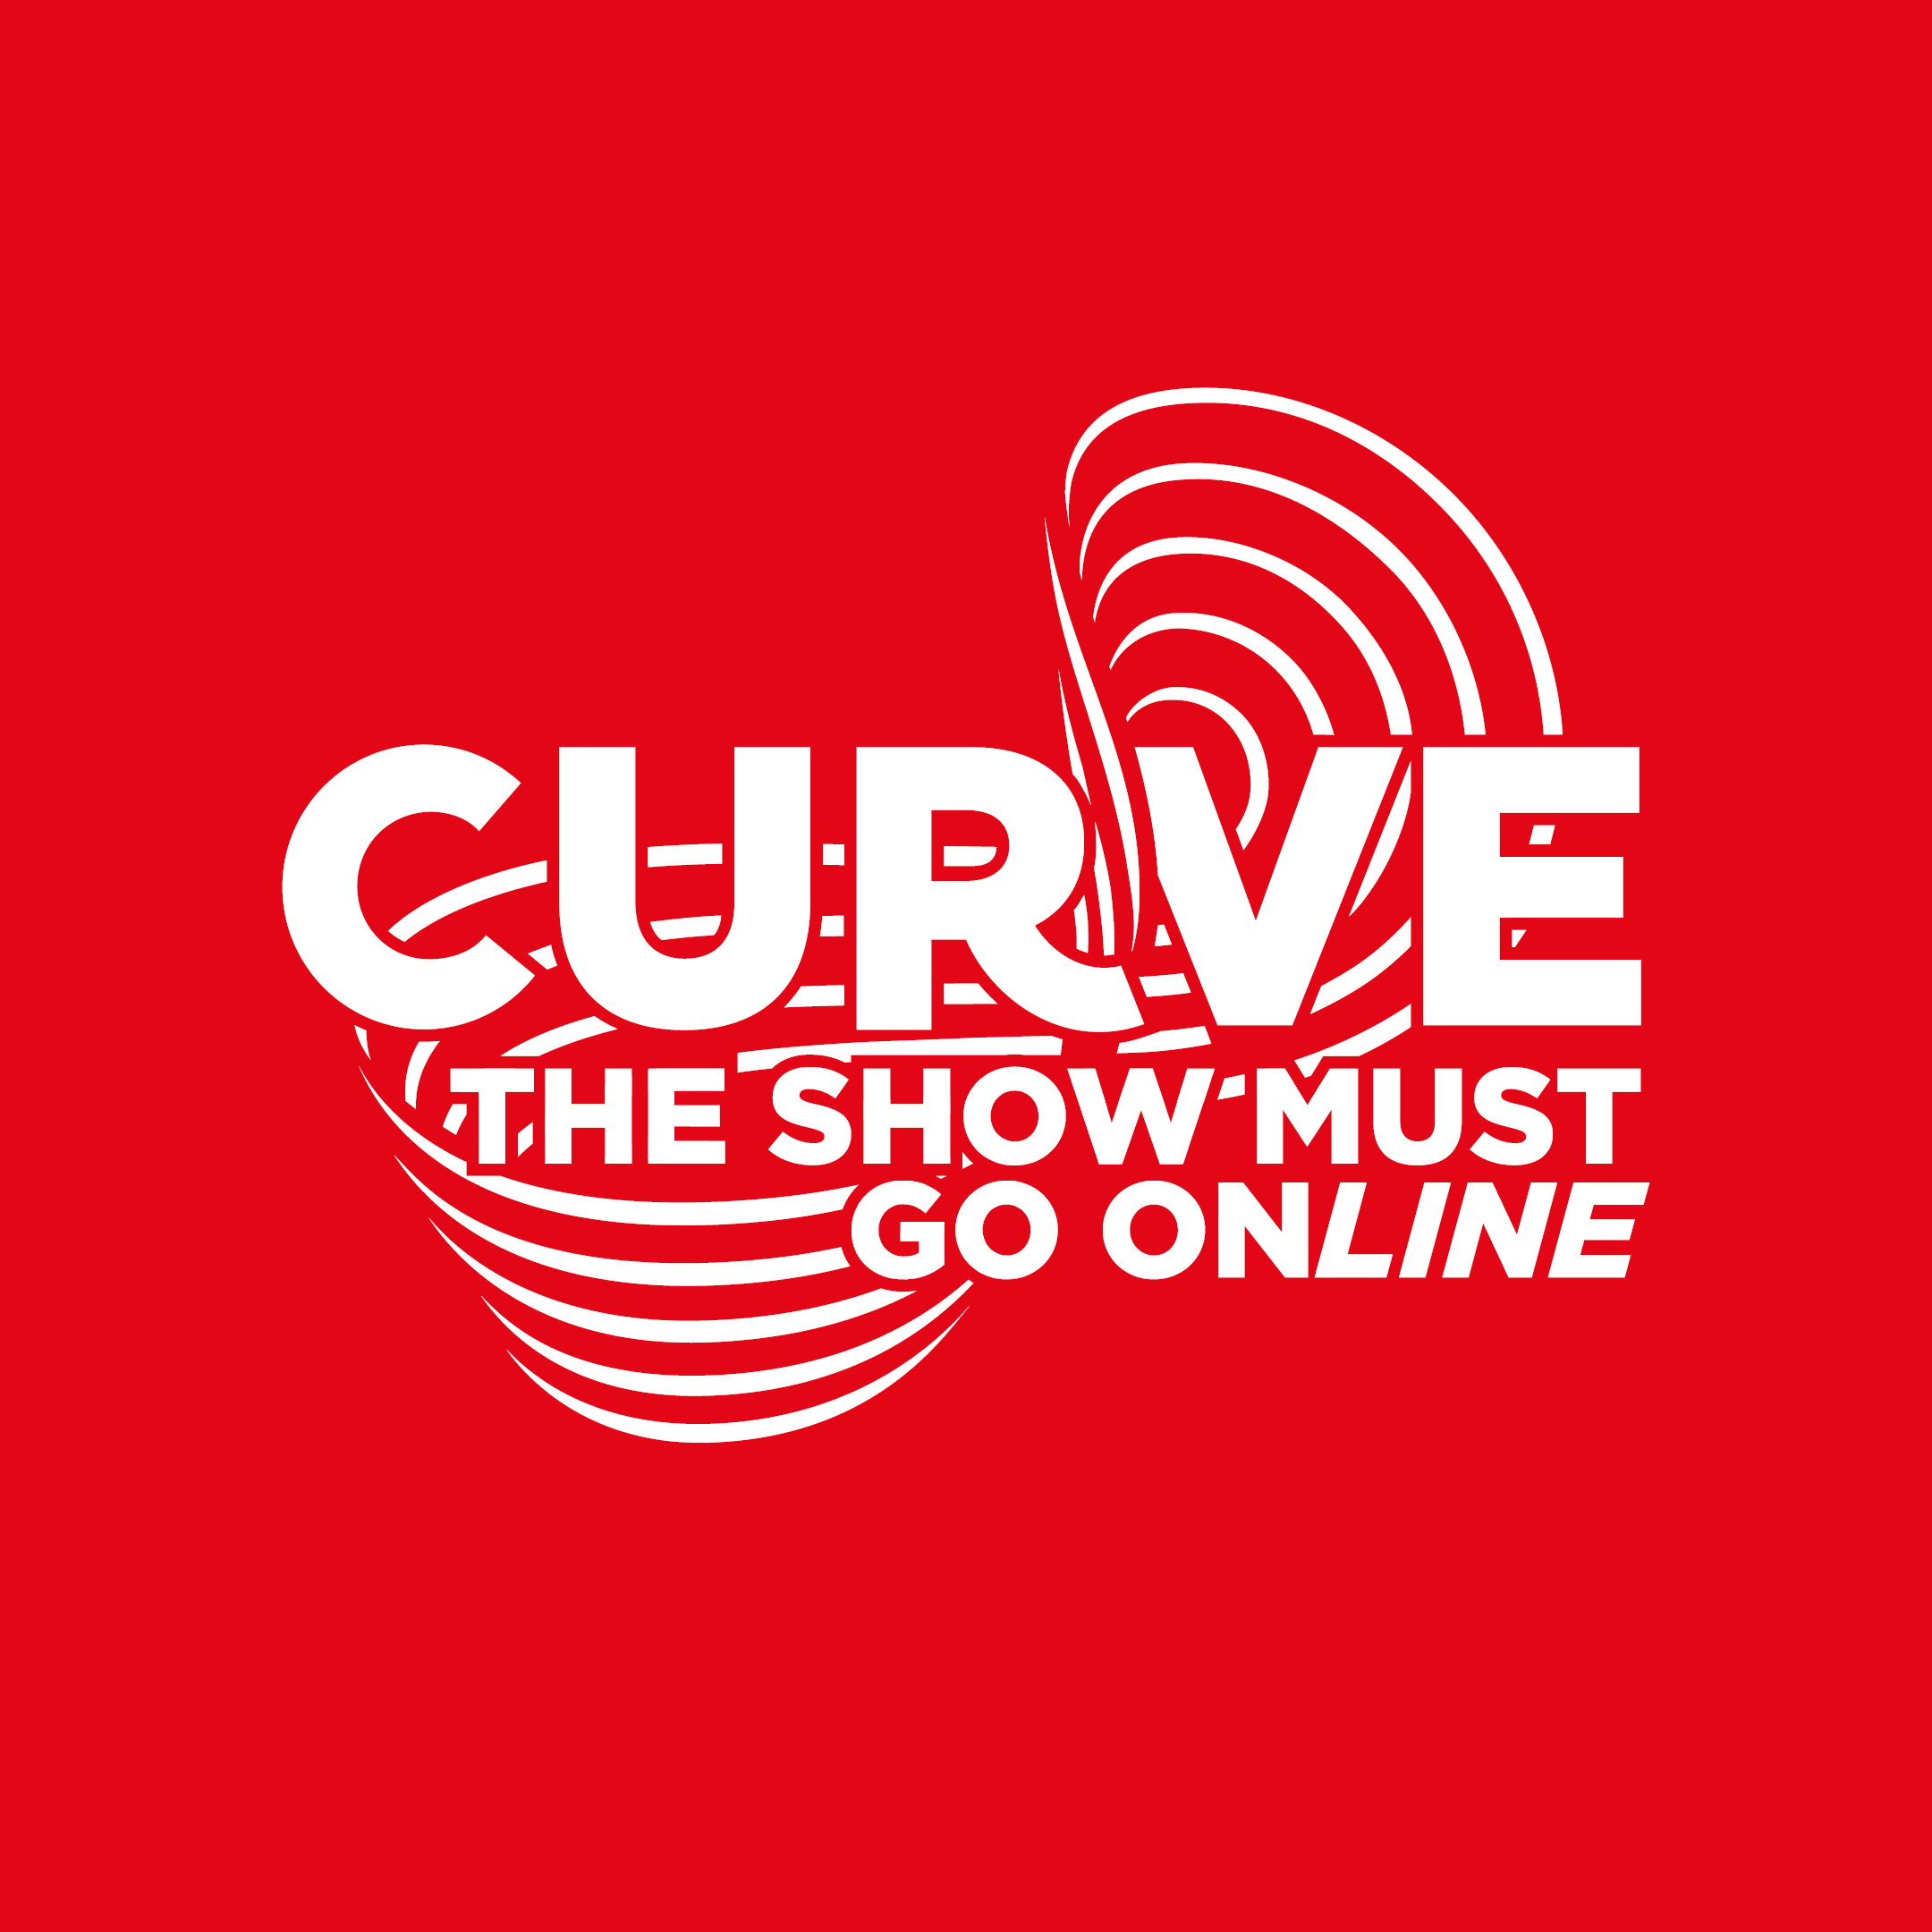 White Curve The Show Must Go Online logo on red background.